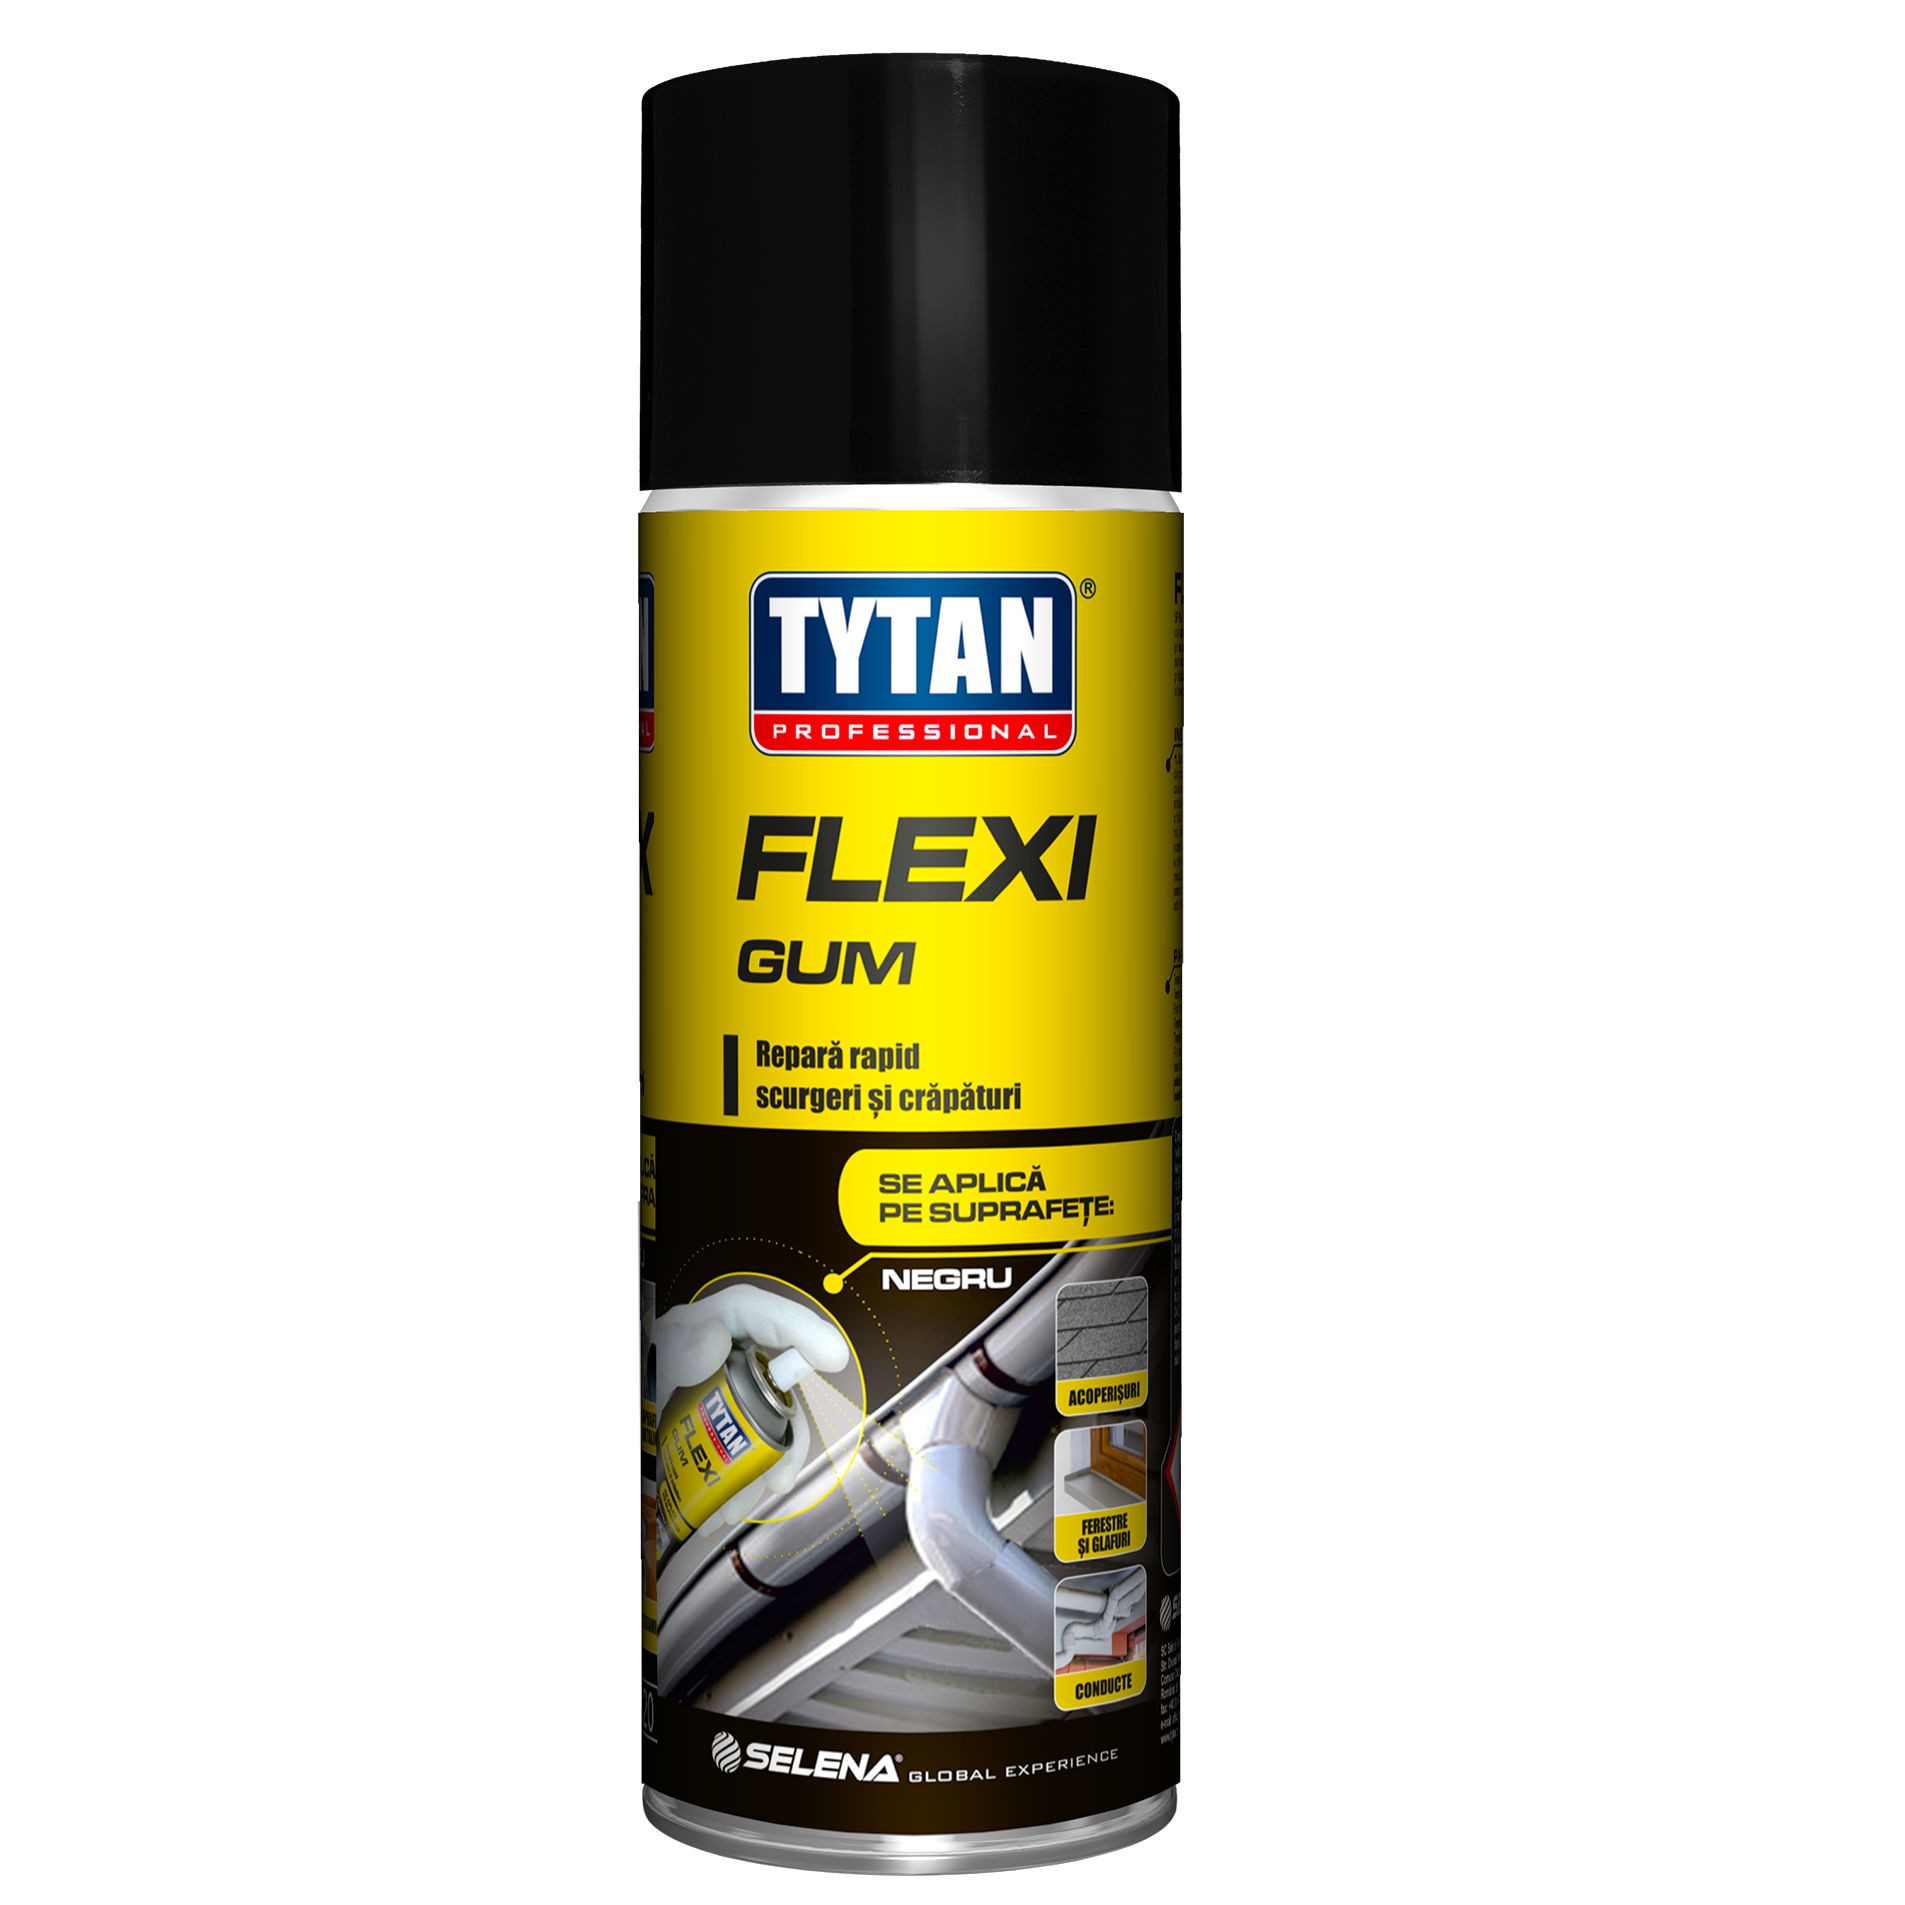 Products for waterproofing and sealing - Flexi Gum Hydro Insulation Spray Liquid Rubber Tytan Professional 400ml, https:maxbau.ro